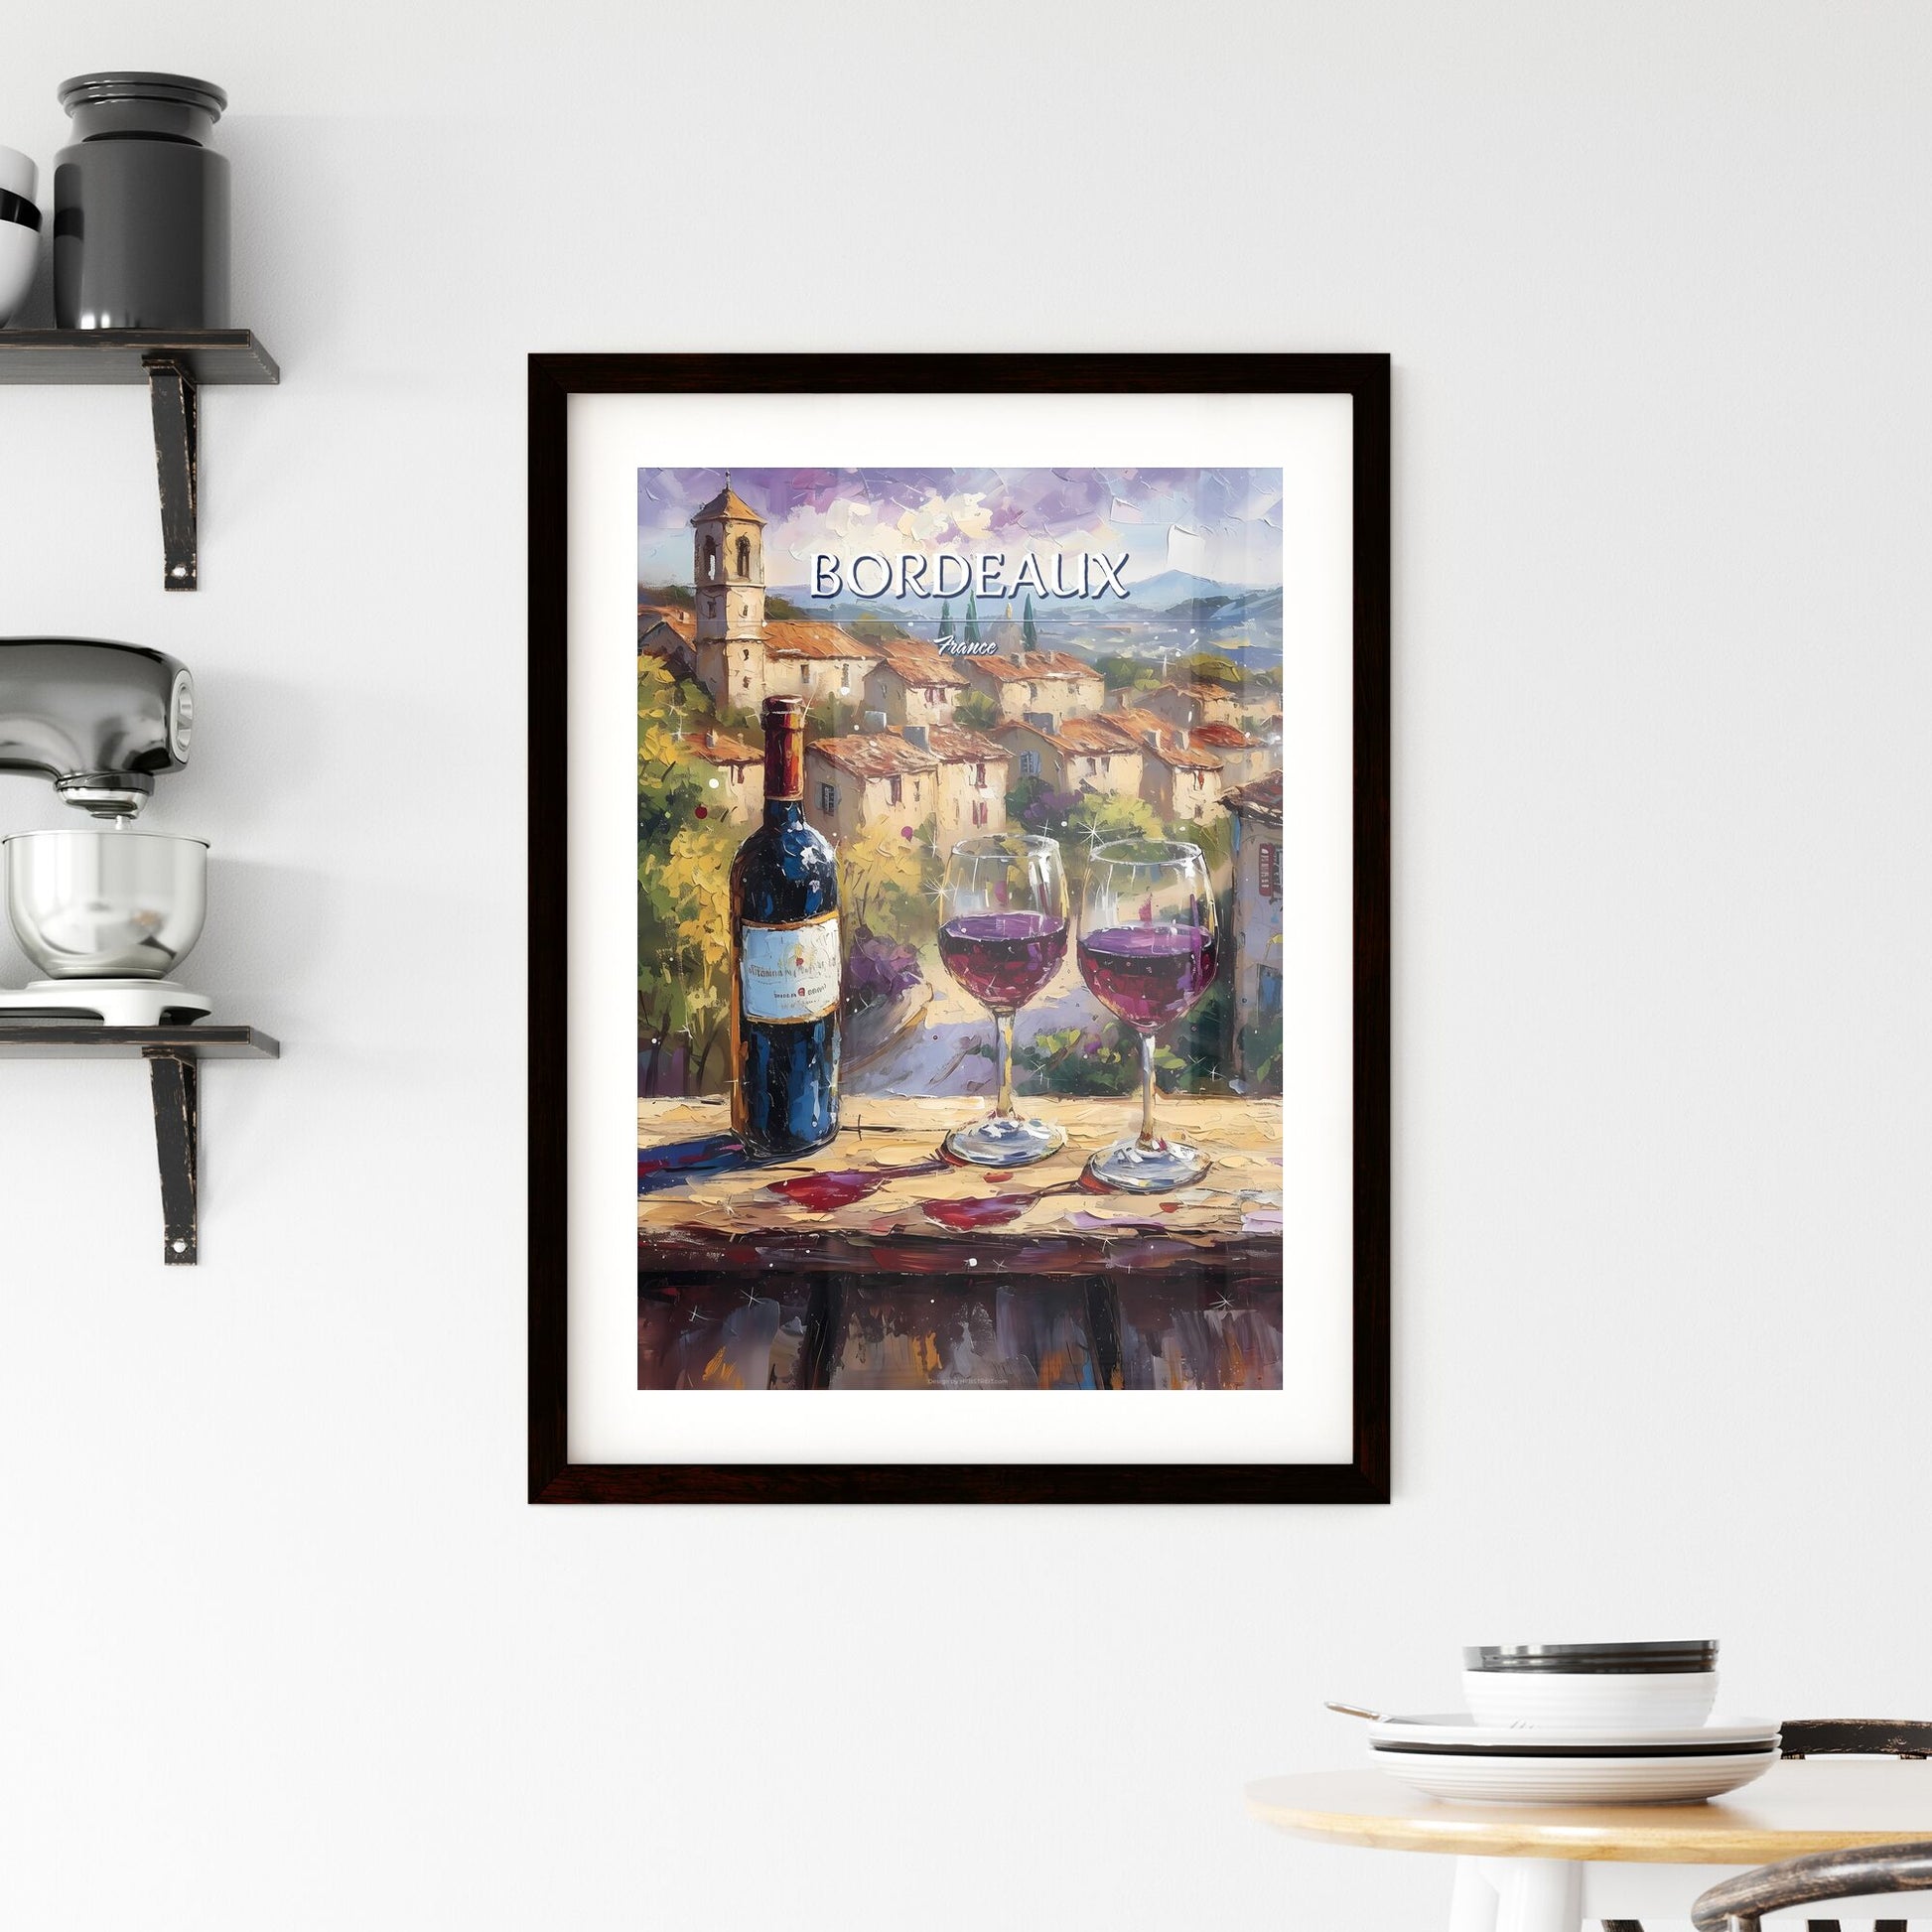 Bordeaux, France - Art print of a bottle and glasses of wine on a table Default Title